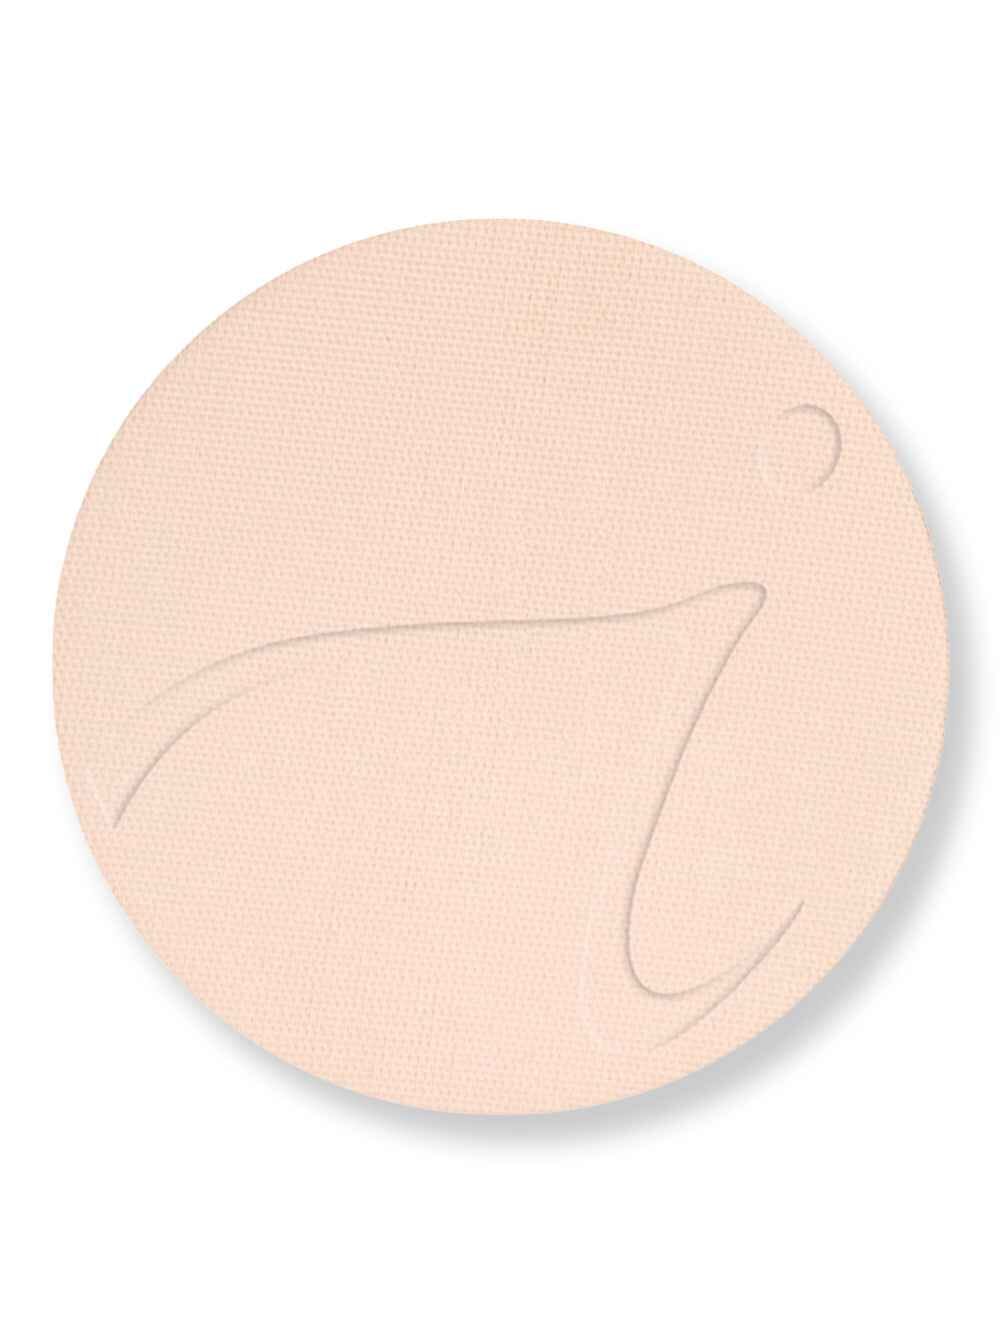 Jane Iredale Jane Iredale PurePressed Base Mineral Foundation Refill Natural Tinted Moisturizers & Foundations 